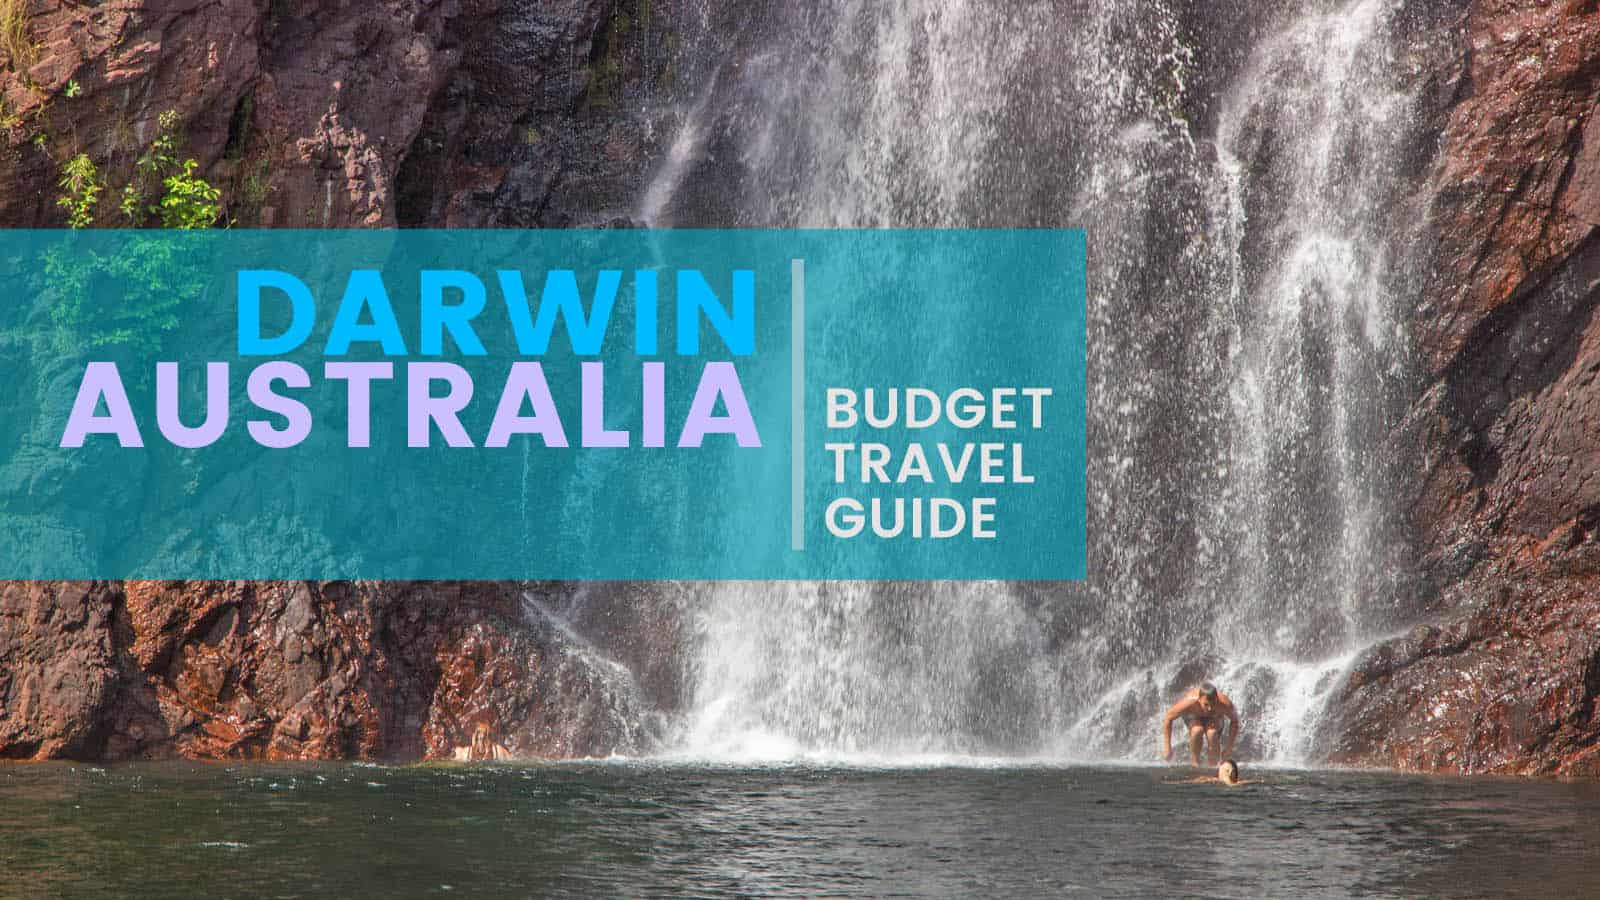 DARWIN ON A BUDGET: Free Itinerary & Travel Guide